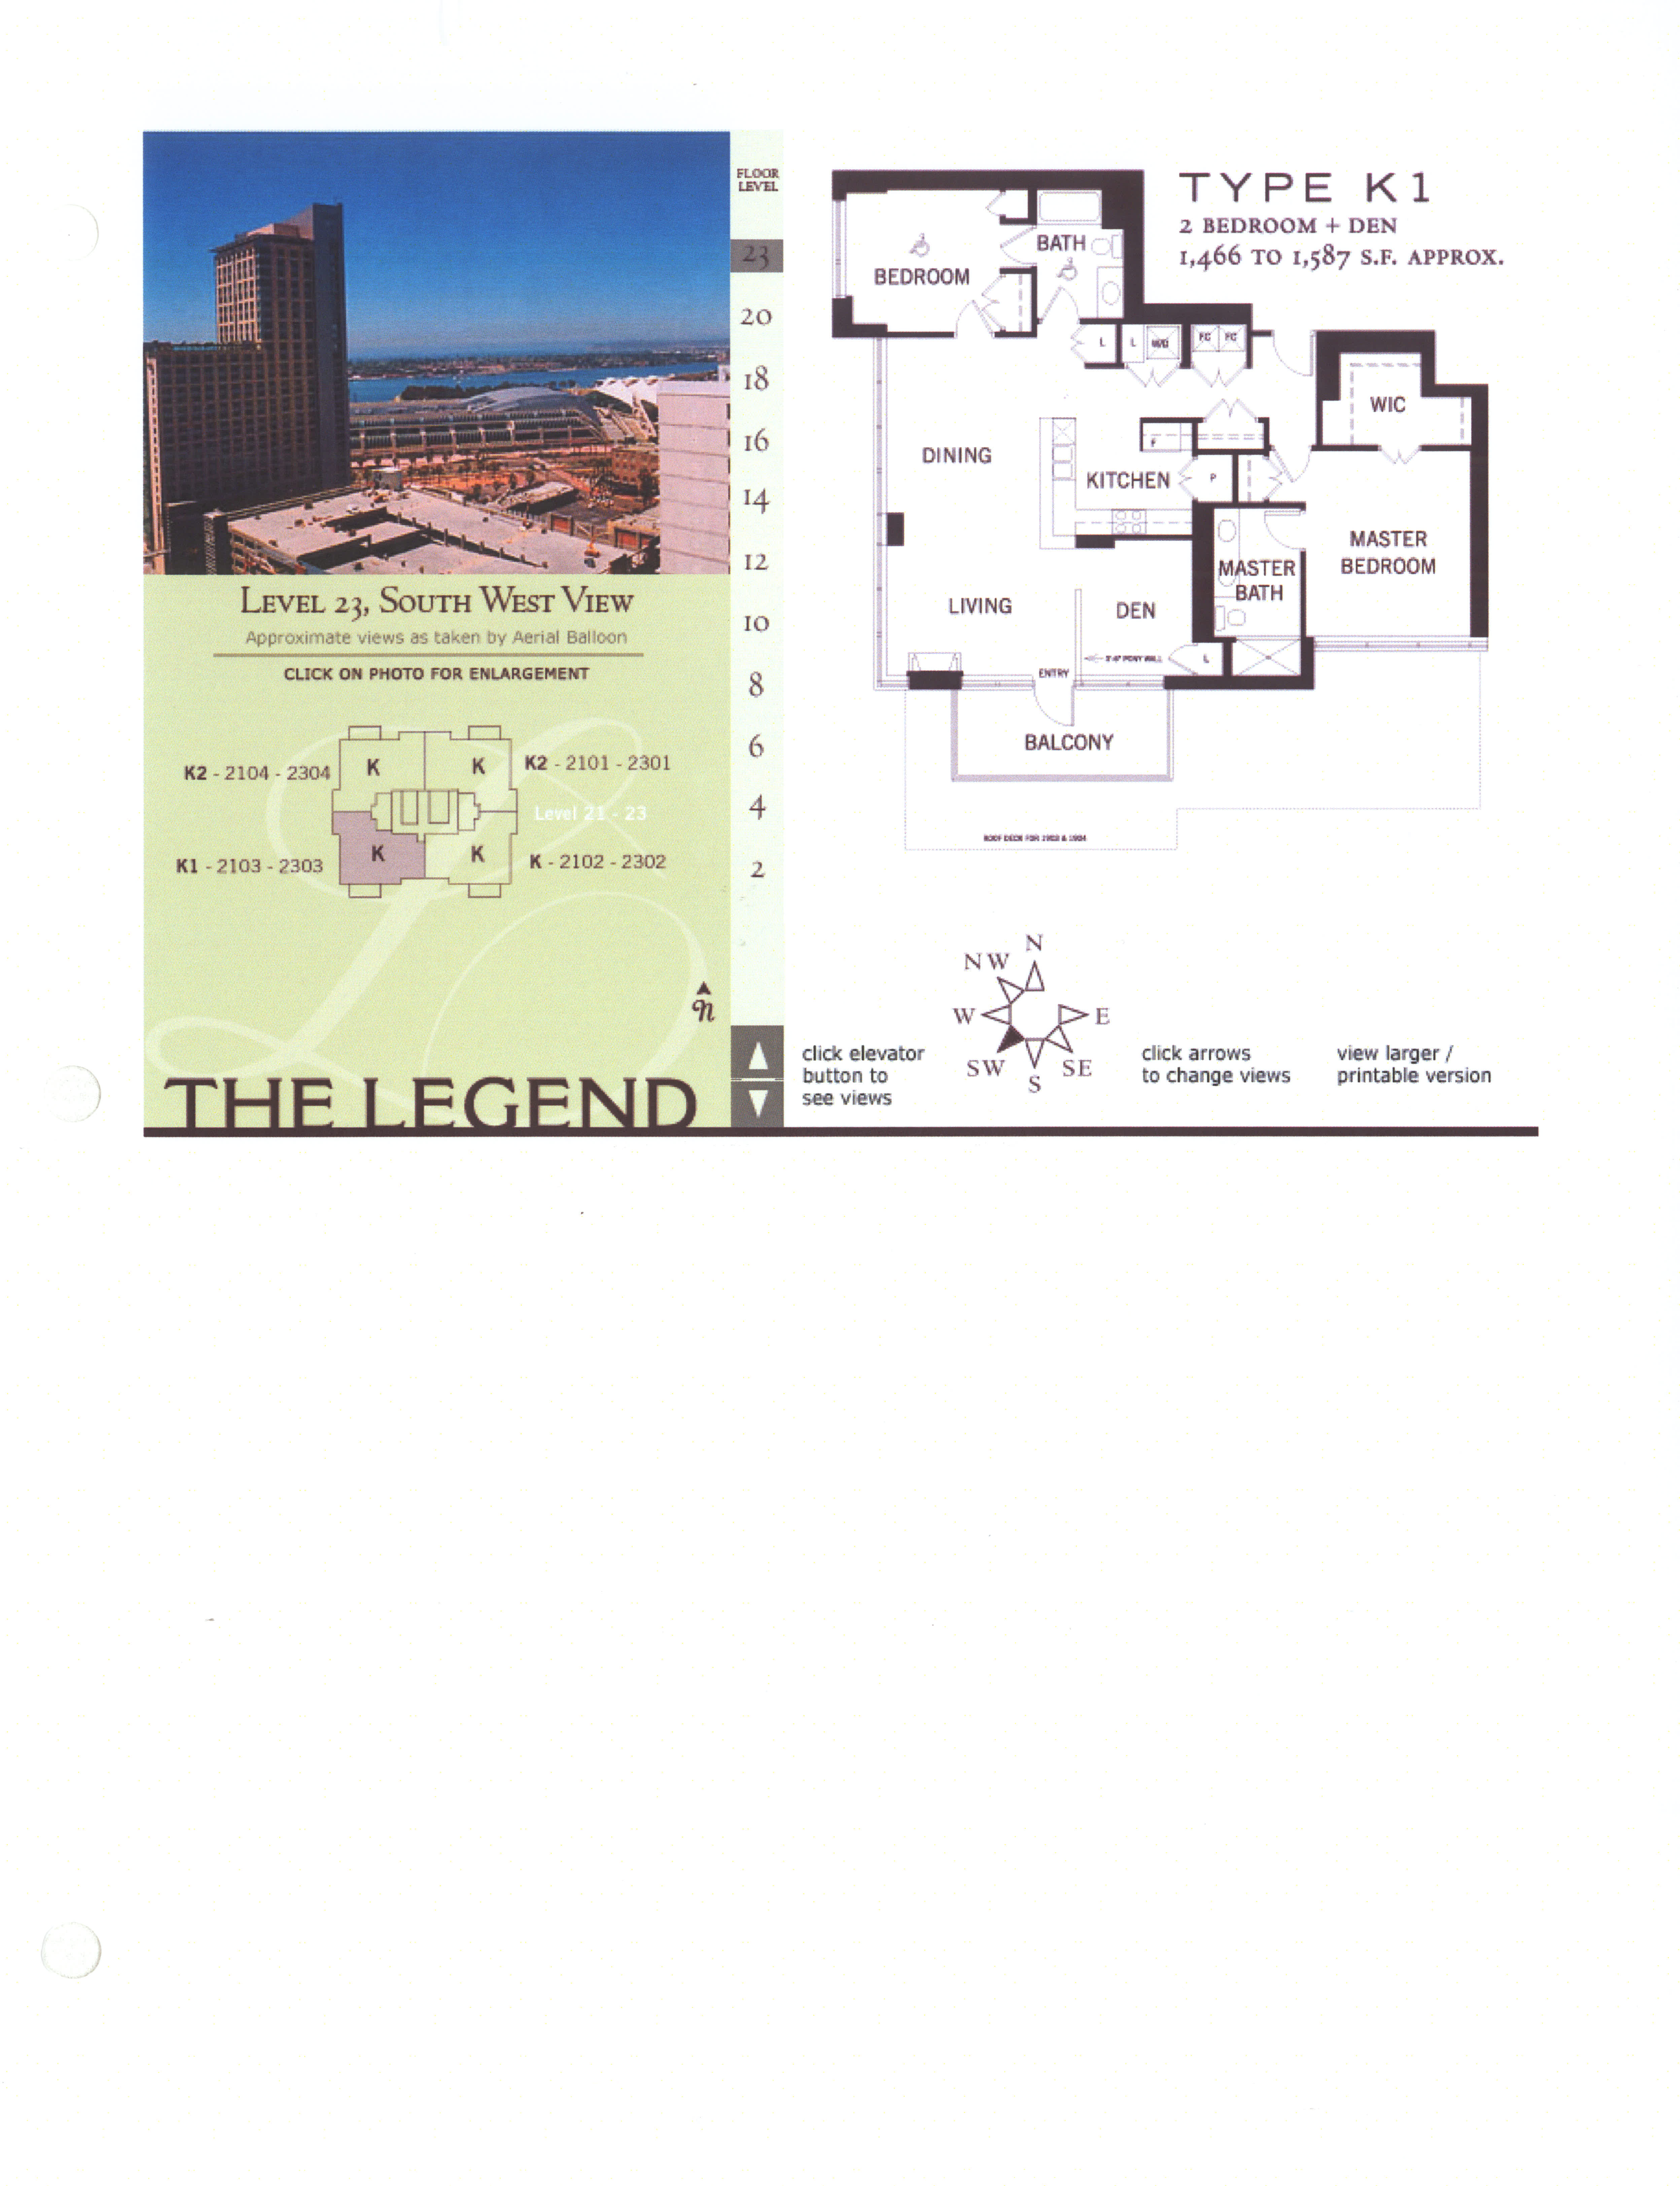 The Legend Floor Plan Level 23, South West View – Type K1